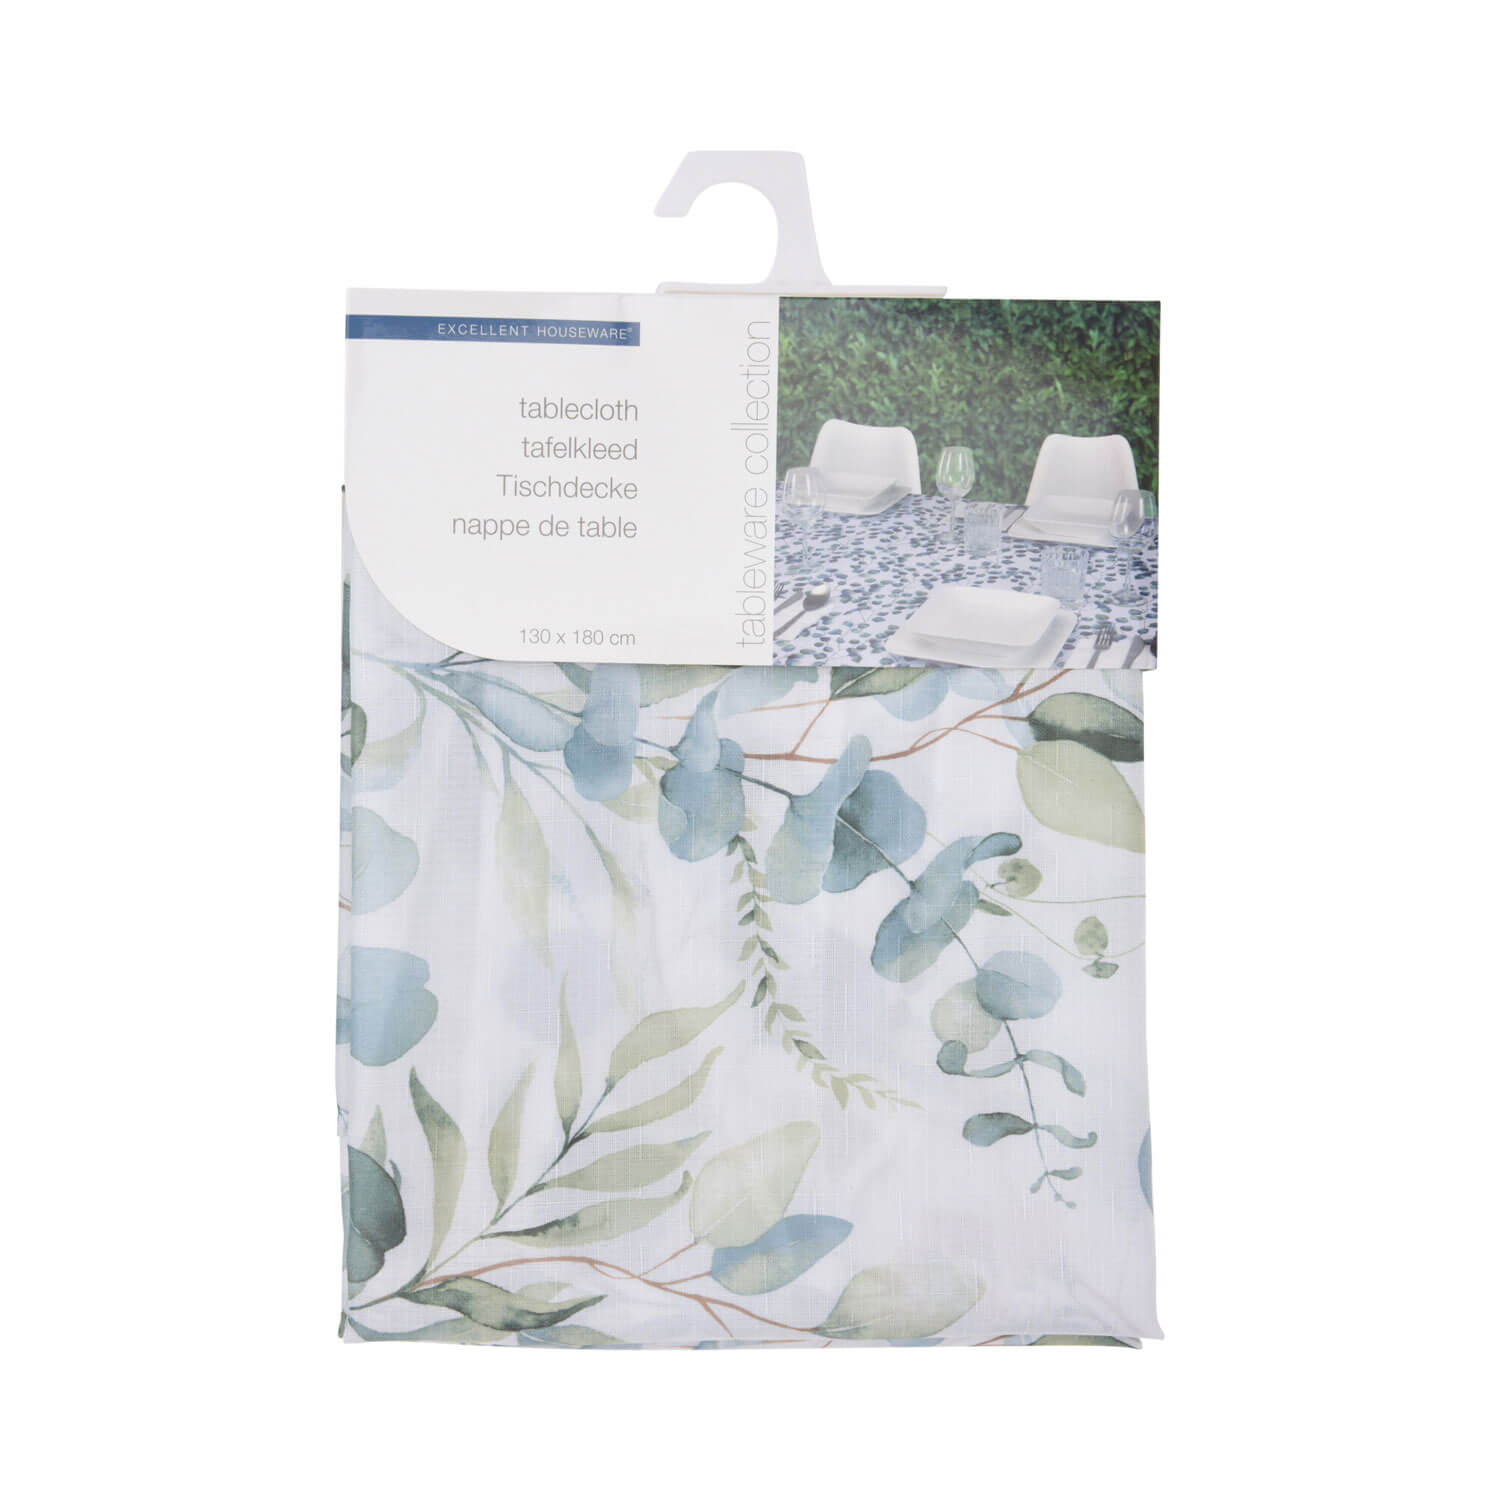 The Home Kitchen Watercolour Foliage Tablecloth 1 Shaws Department Stores